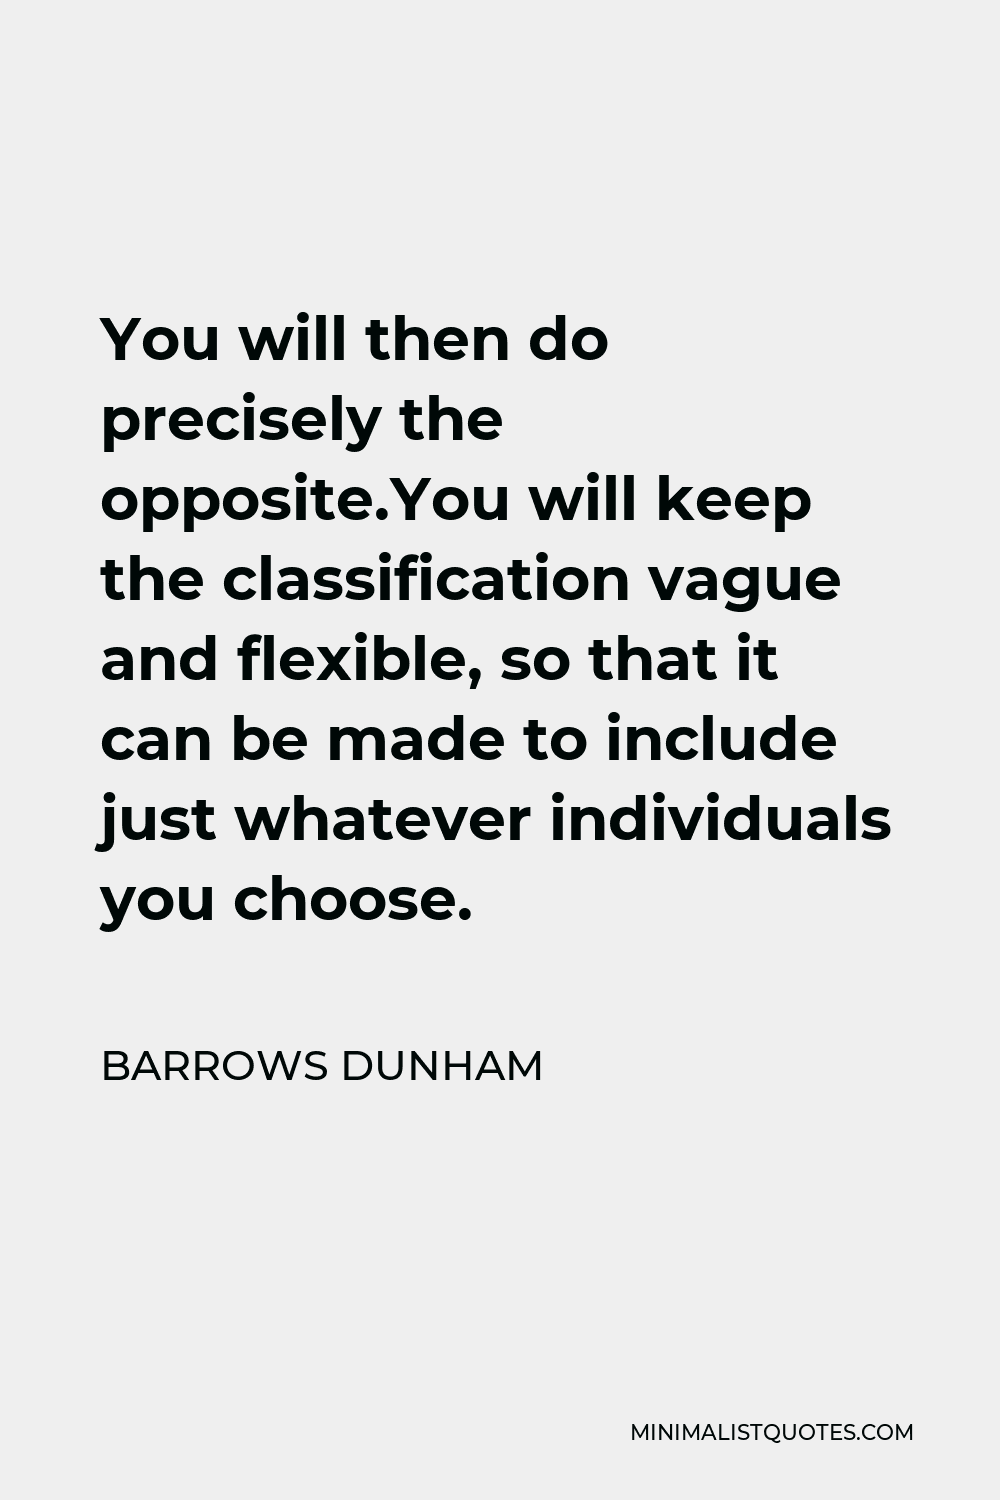 Barrows Dunham Quote - You will then do precisely the opposite.You will keep the classification vague and flexible, so that it can be made to include just whatever individuals you choose.